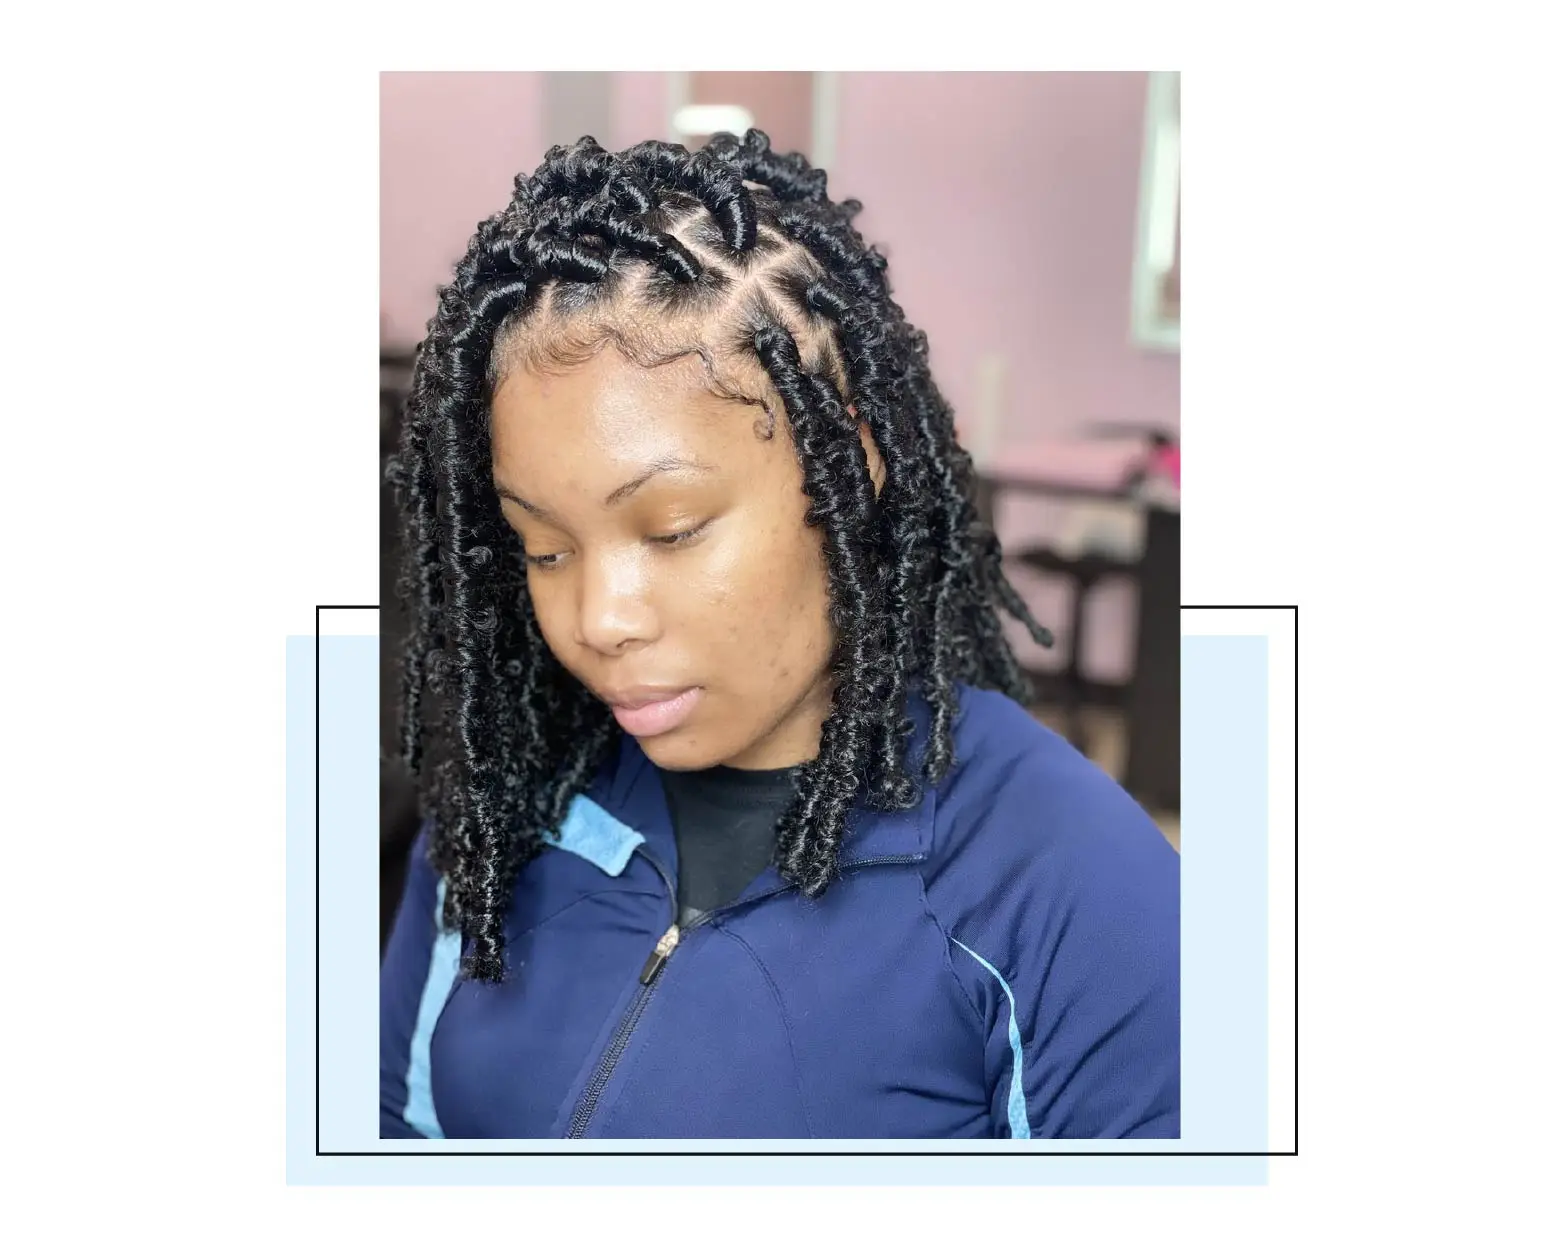 Woman with soft locs and laid edges.